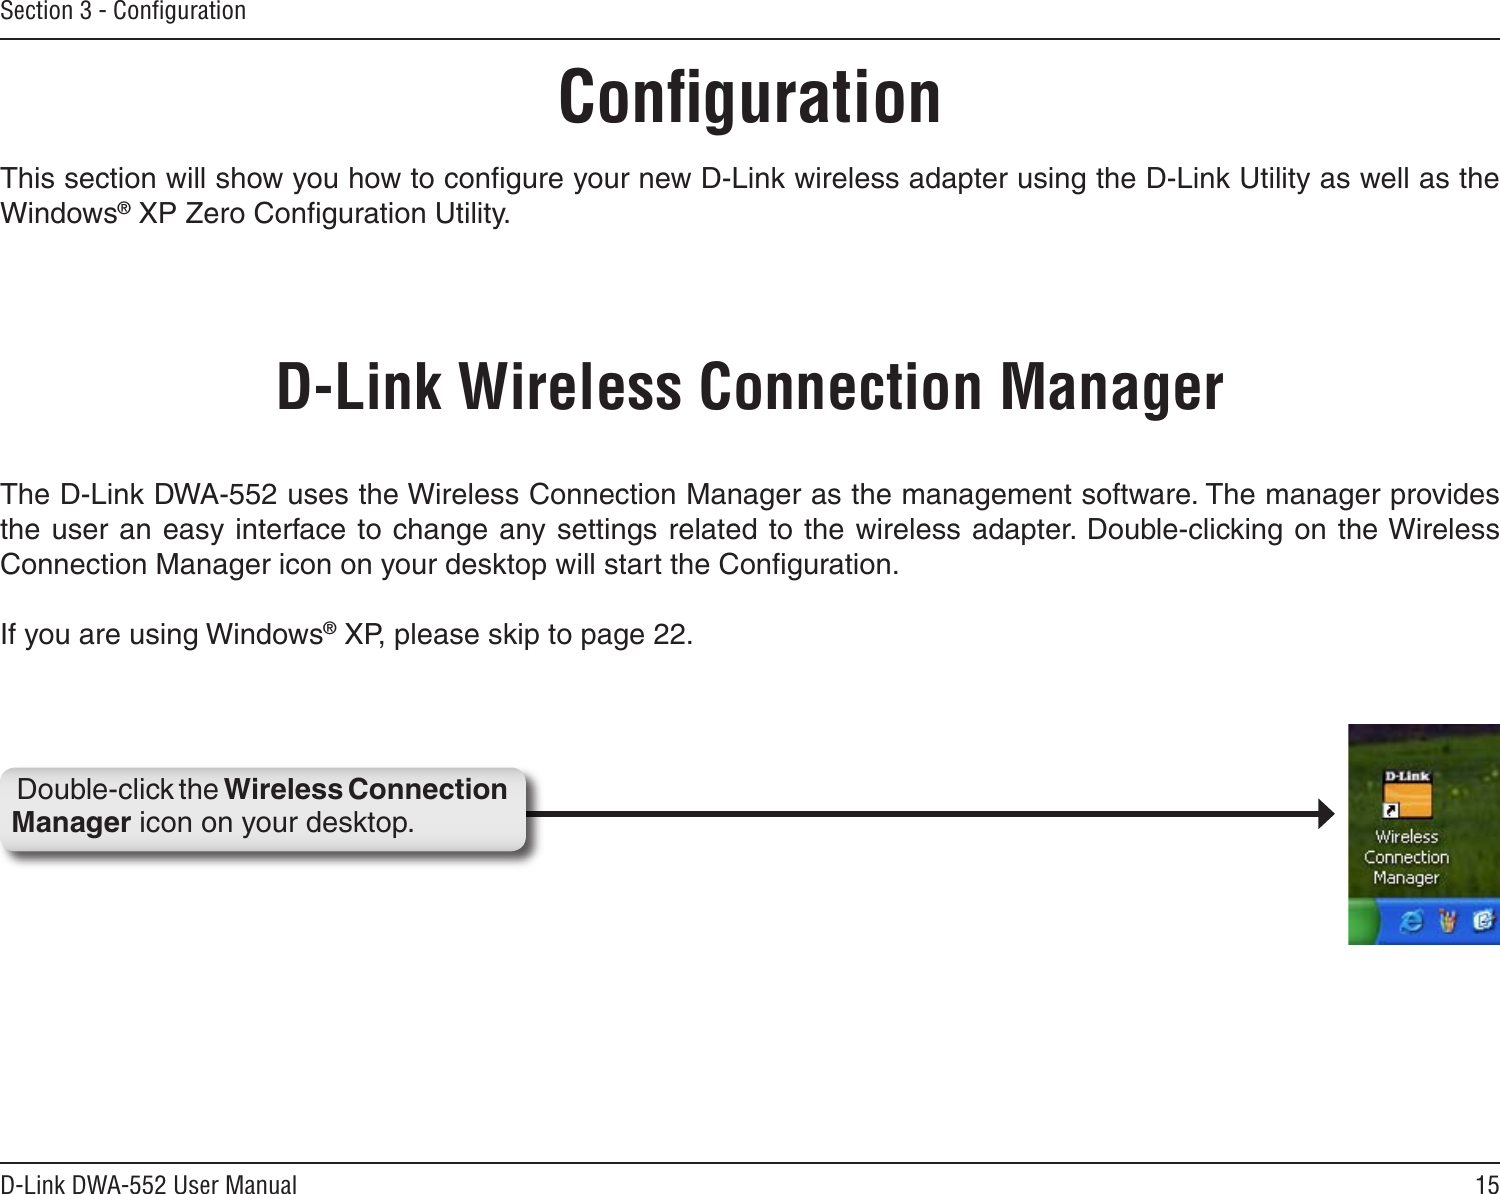 15D-Link DWA-552 User ManualSection 3 - ConﬁgurationConﬁgurationThis section will show you how to conﬁgure your new D-Link wireless adapter using the D-Link Utility as well as the Windows® XP Zero Conﬁguration Utility.D-Link Wireless Connection ManagerThe D-Link DWA-552 uses the Wireless Connection Manager as the management software. The manager provides the user an easy interface to change any settings related to the wireless adapter. Double-clicking on the Wireless Connection Manager icon on your desktop will start the Conﬁguration.If you are using Windows® XP, please skip to page 22.Double-click the Wireless Connection Manager icon on your desktop.